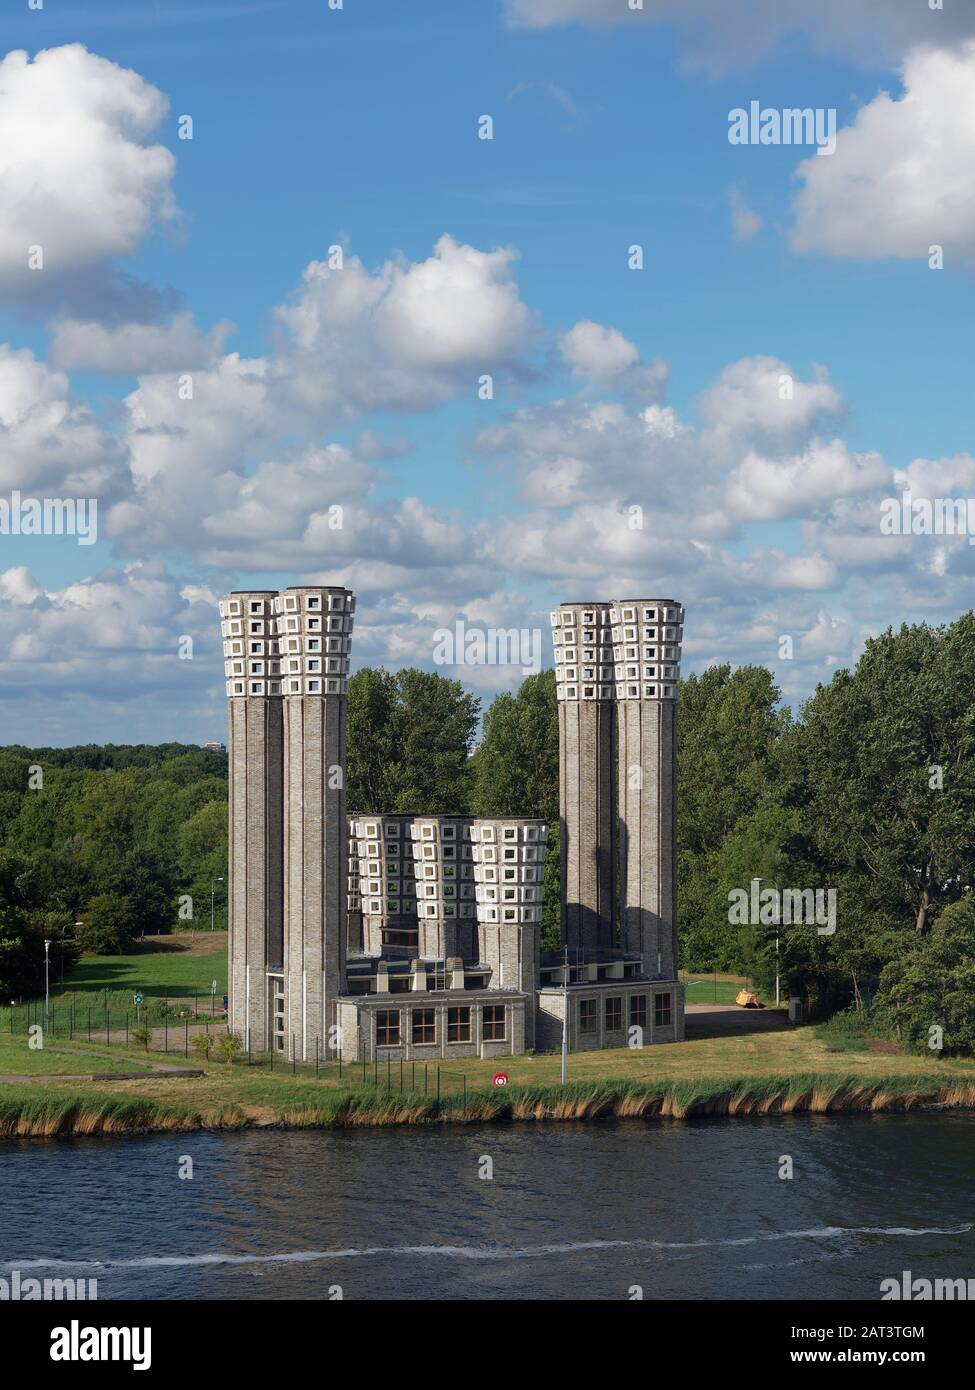 The Velsertunnel Ventilation Towers, providing air to a road tunnel on the north bank of the Dutch North Sea Canal near to the Port of Amsterdam. Stock Photo